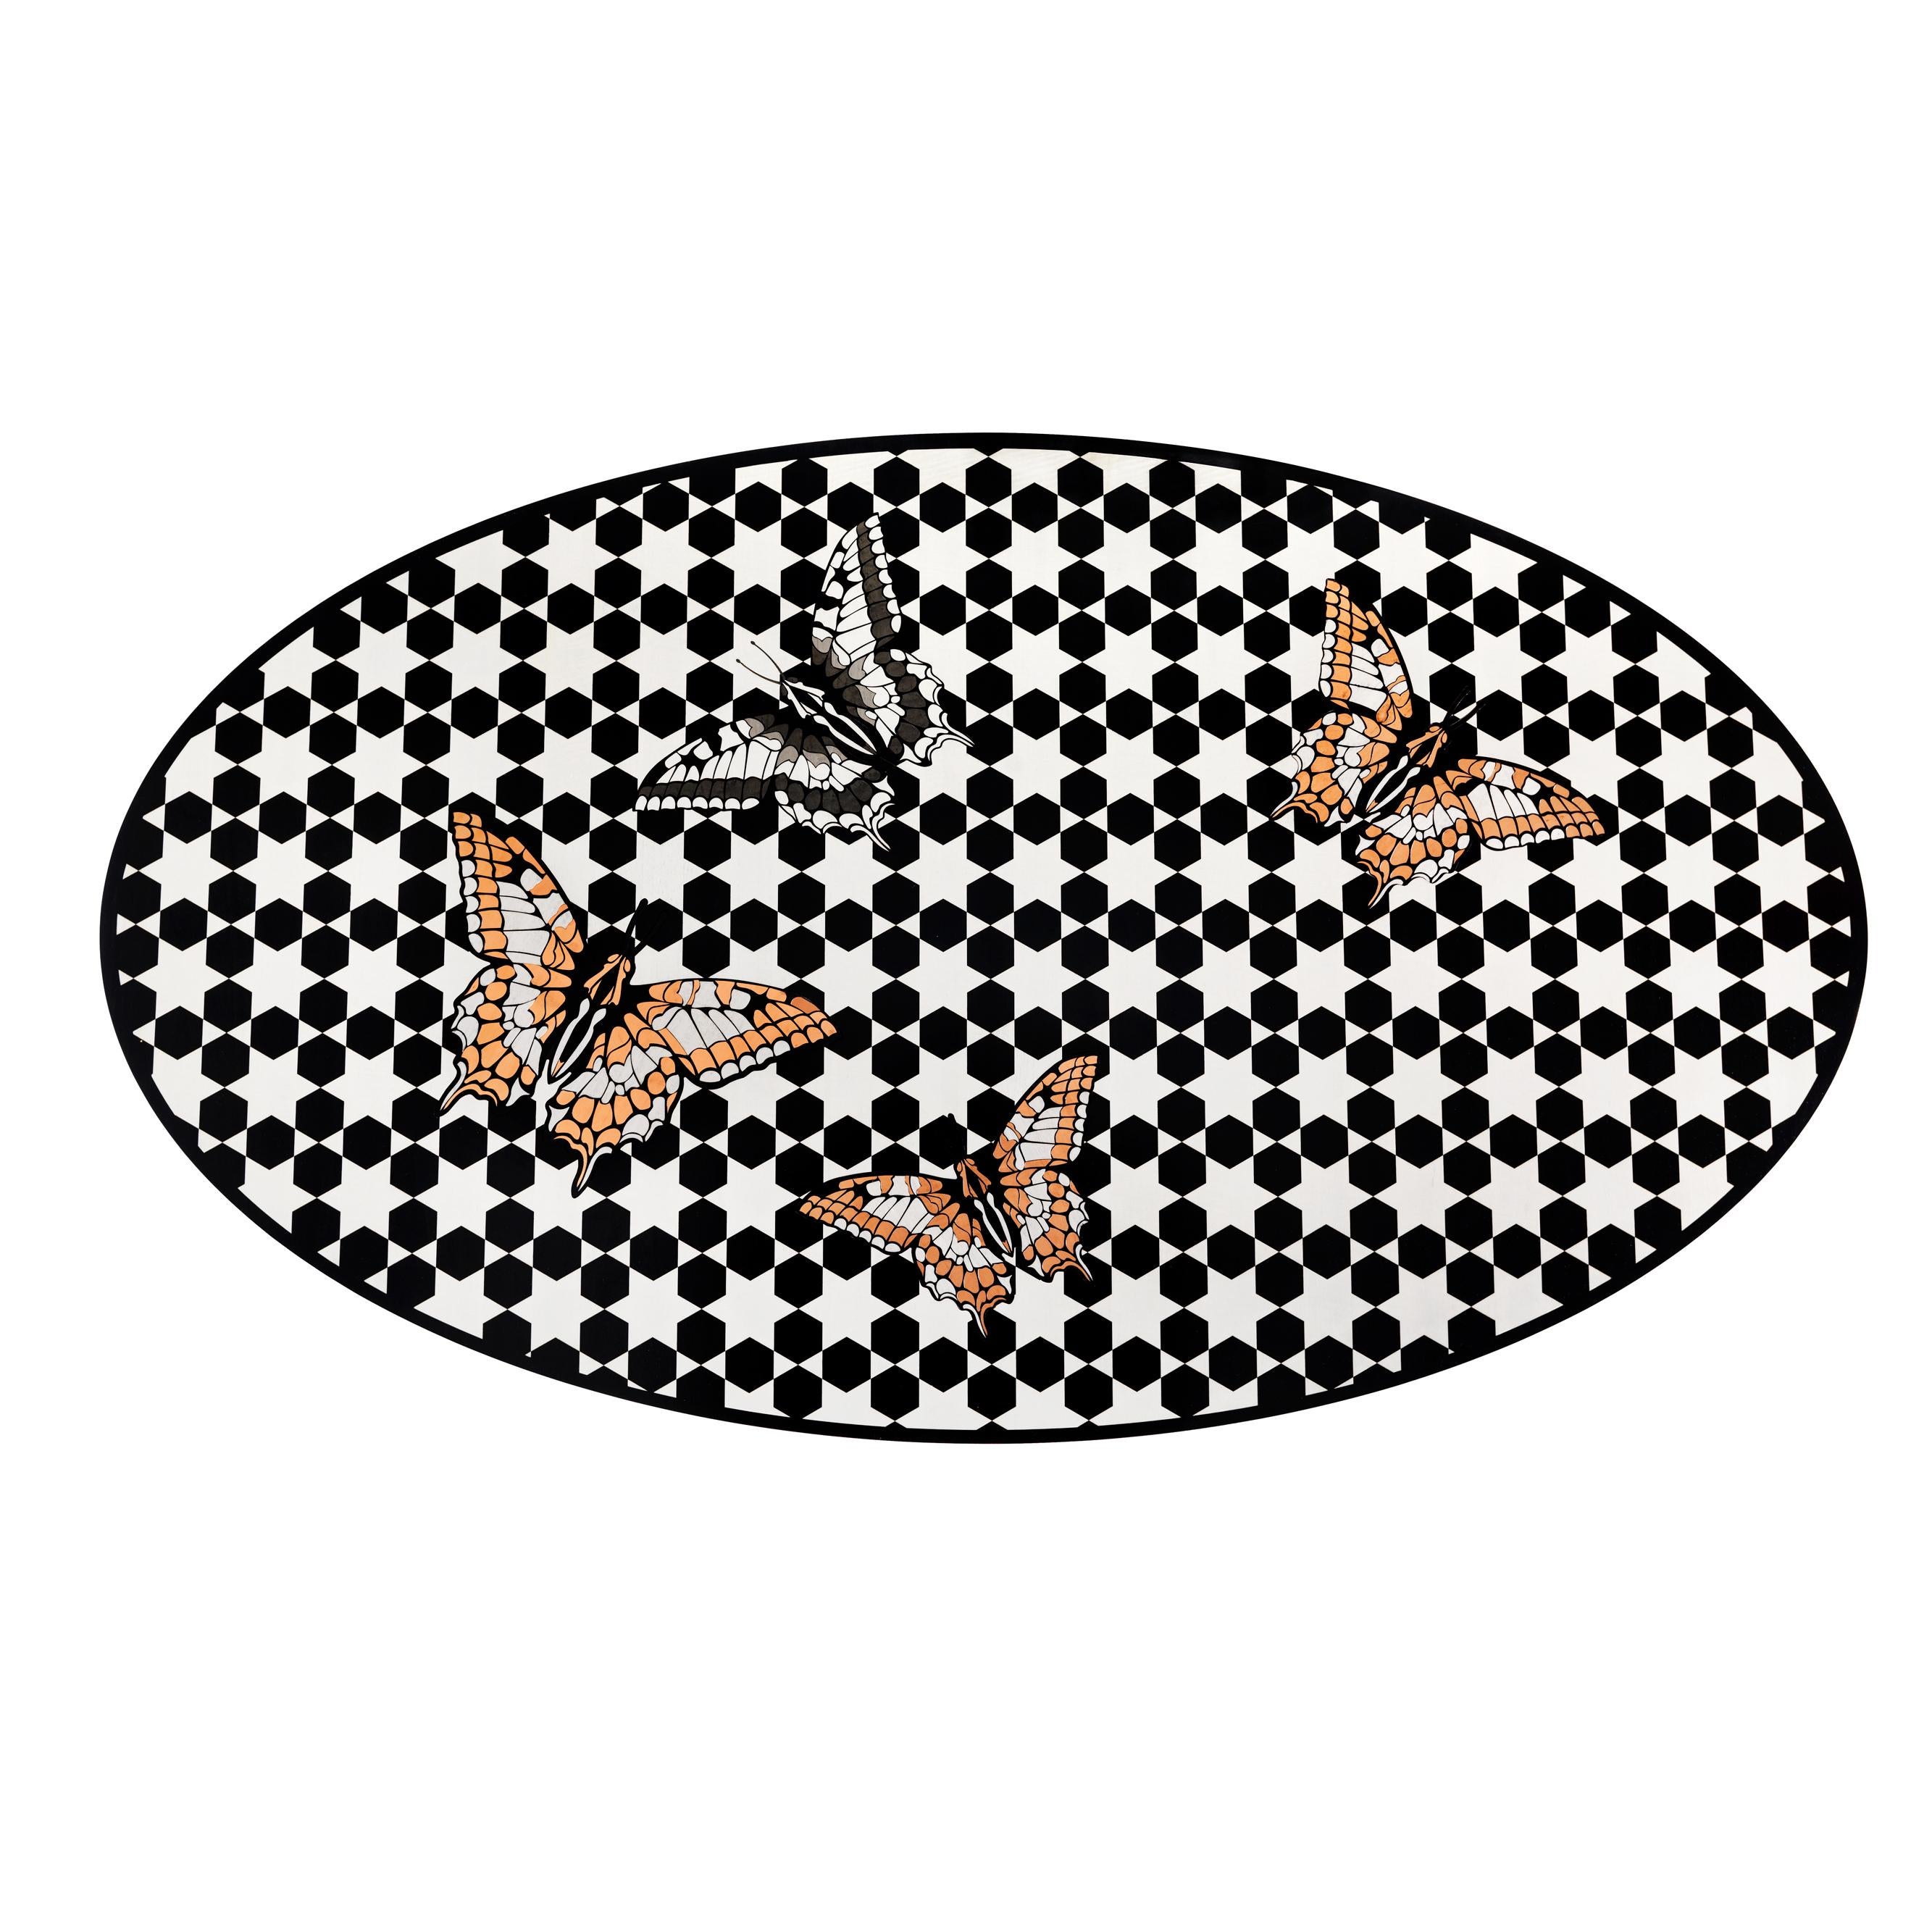 Other Contemporary White and Black Wood Veneer Oval Table with Copper Decorations  For Sale